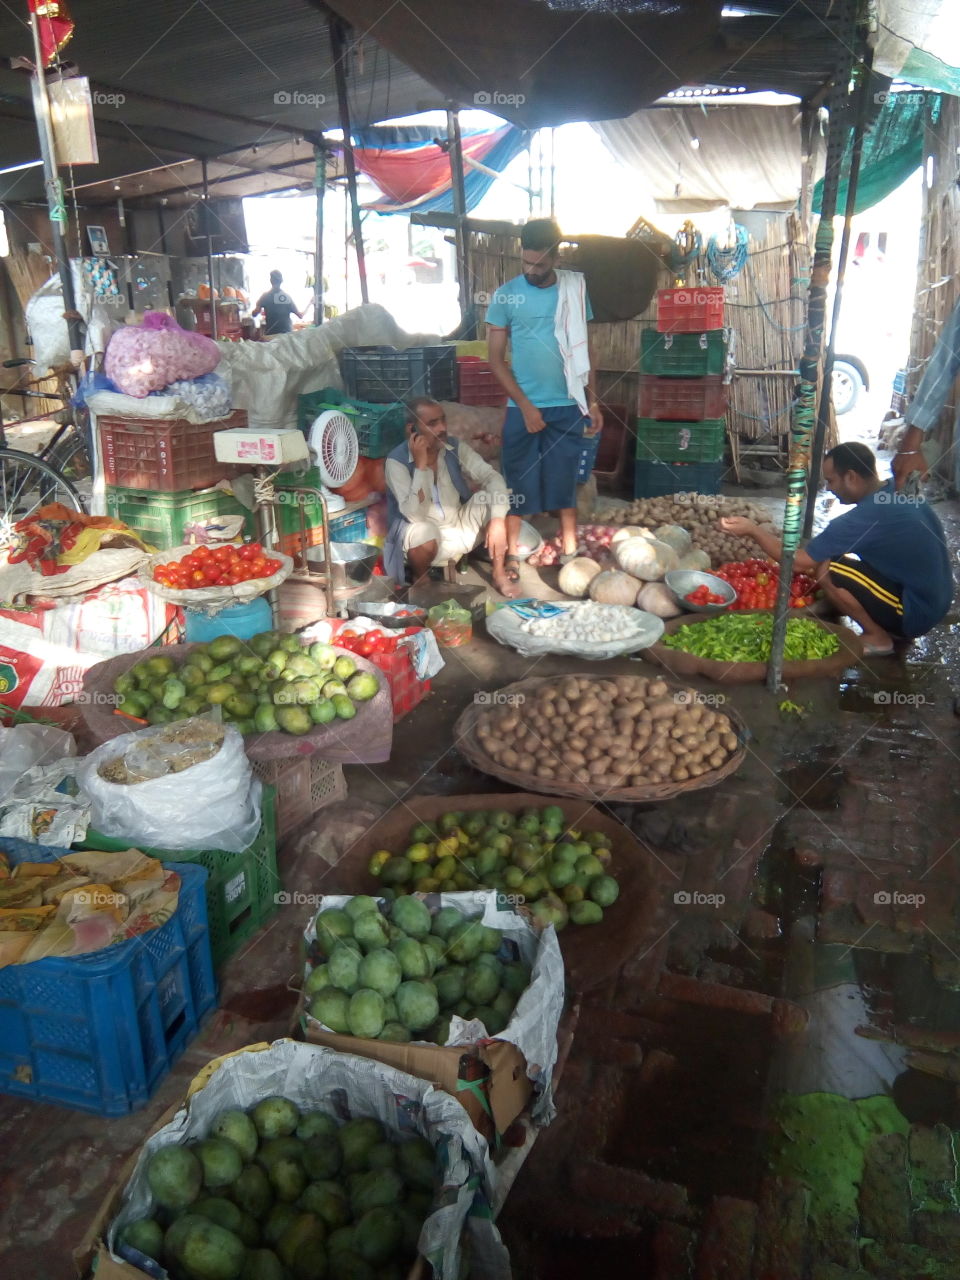 people in small business- a seen of a vegetable market.